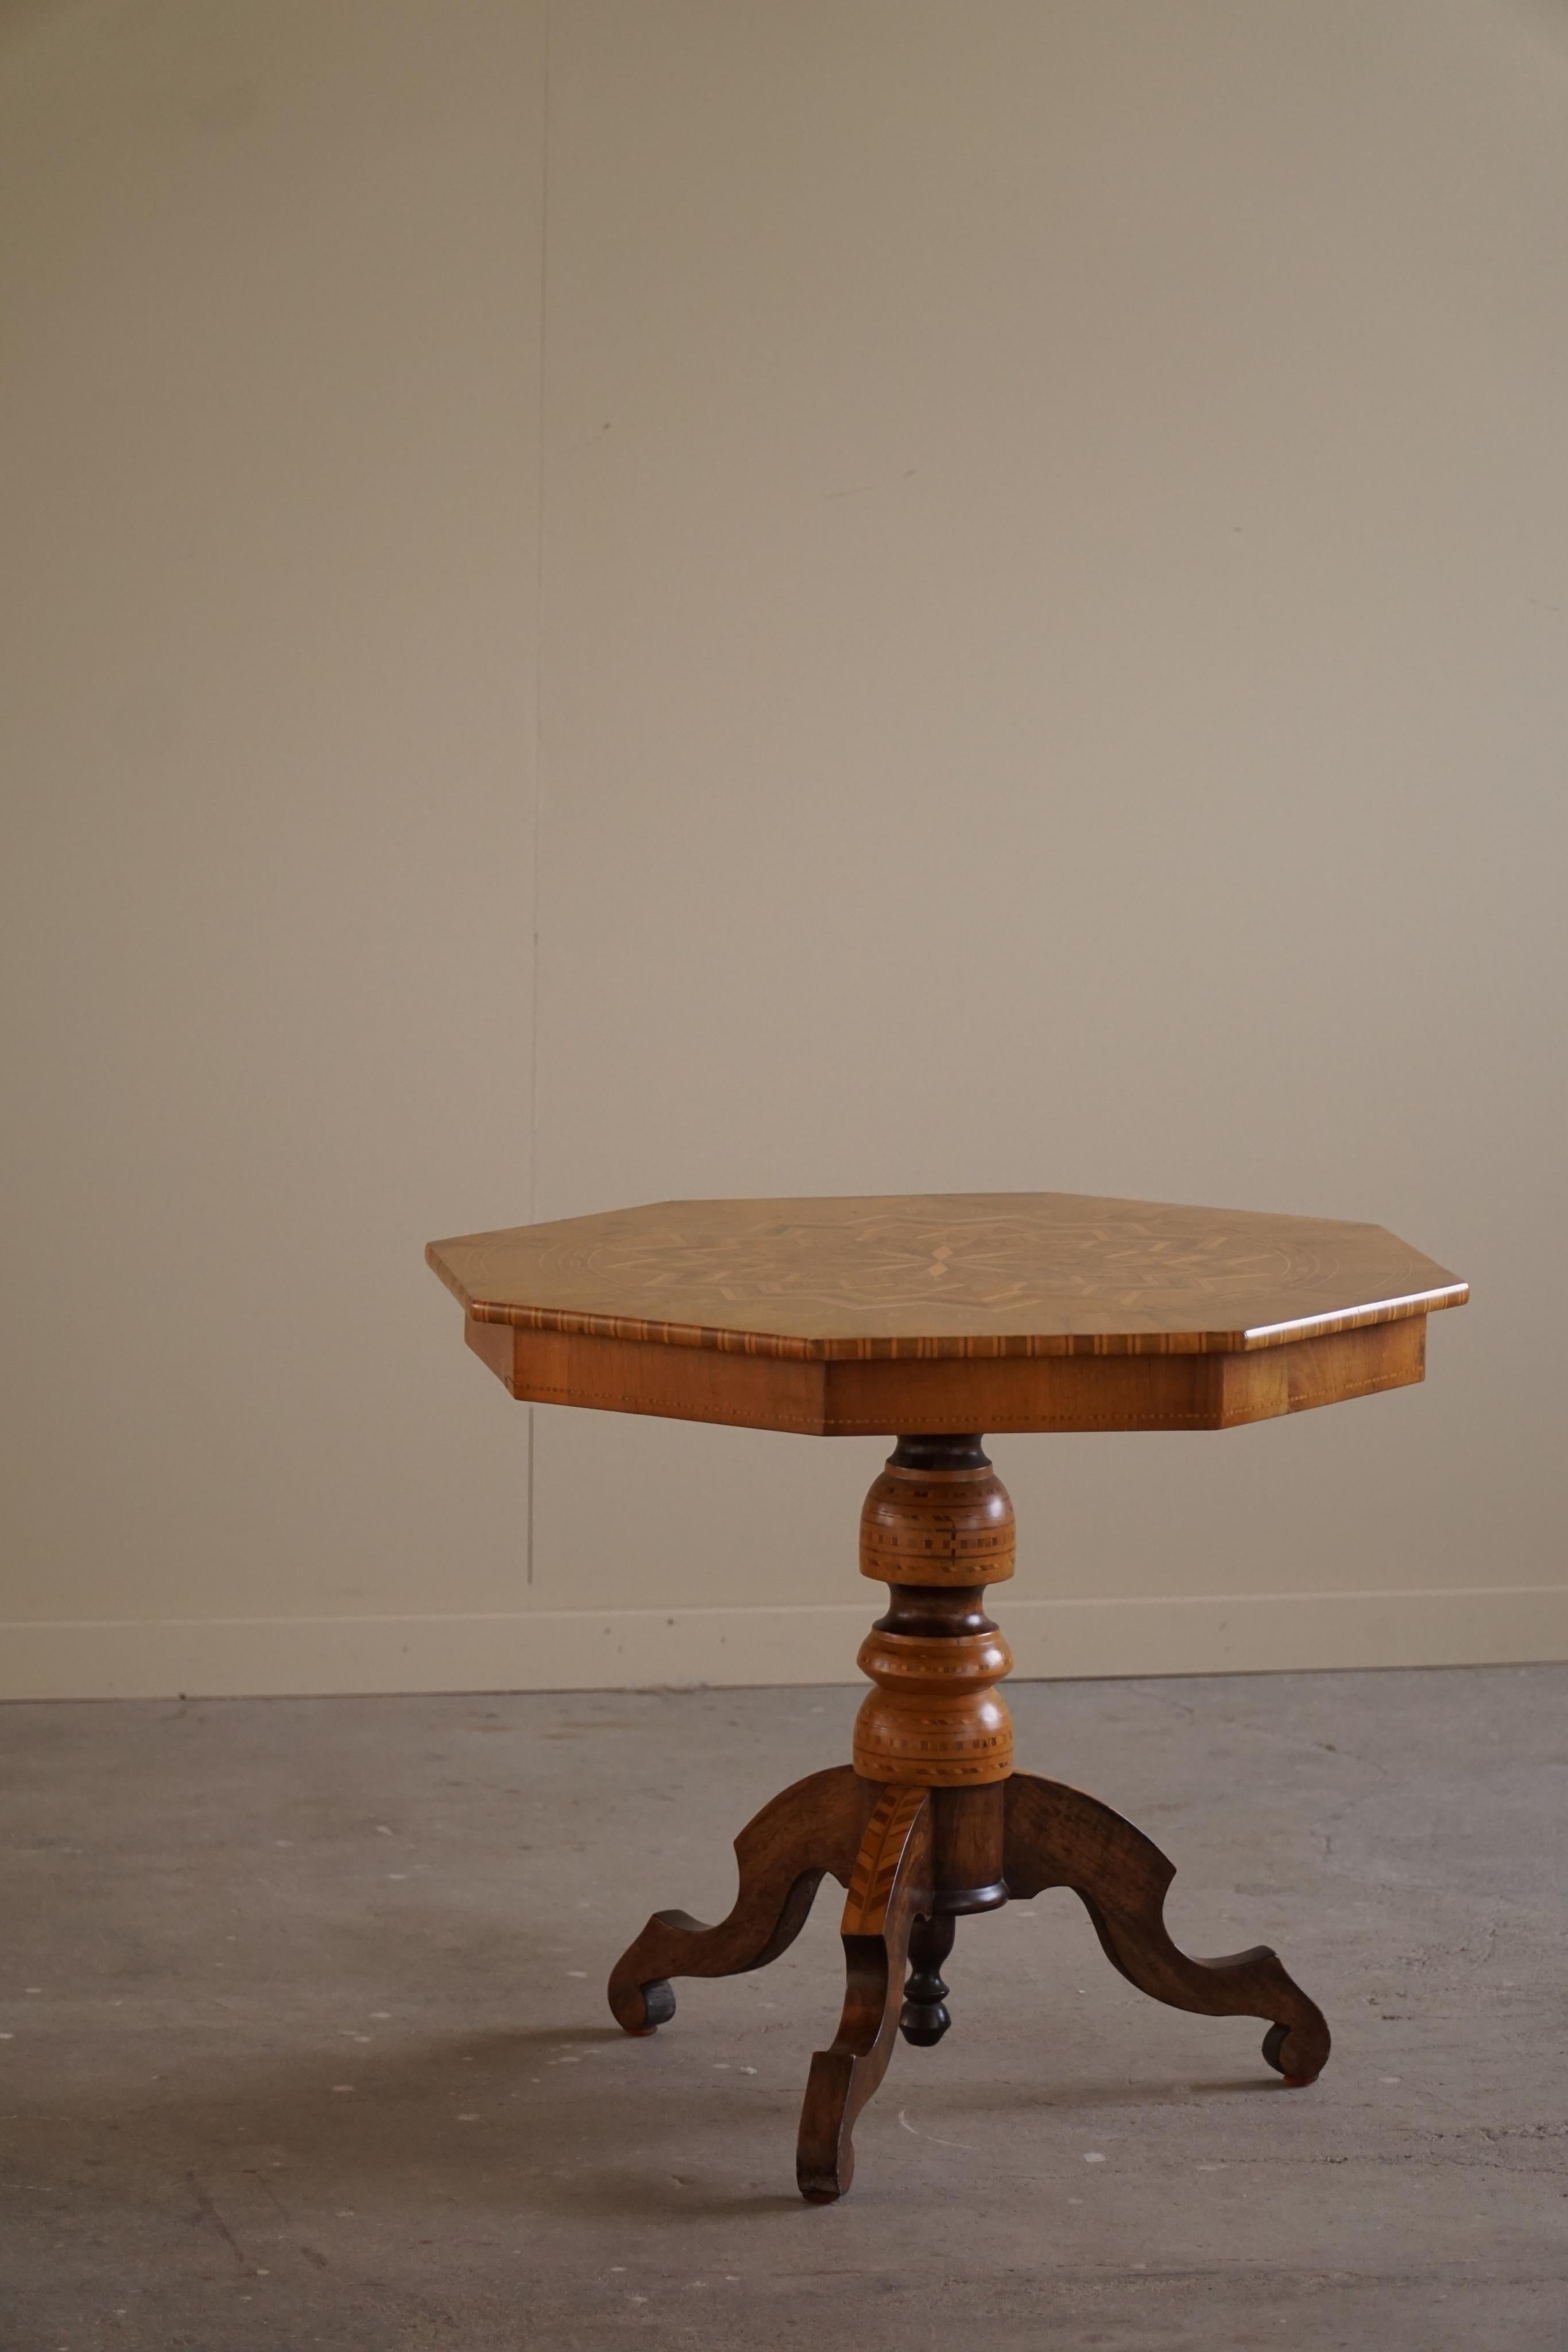 Danish Art Deco, Octagon Side Table in Birch With Intarsia Top, 1940s For Sale 4